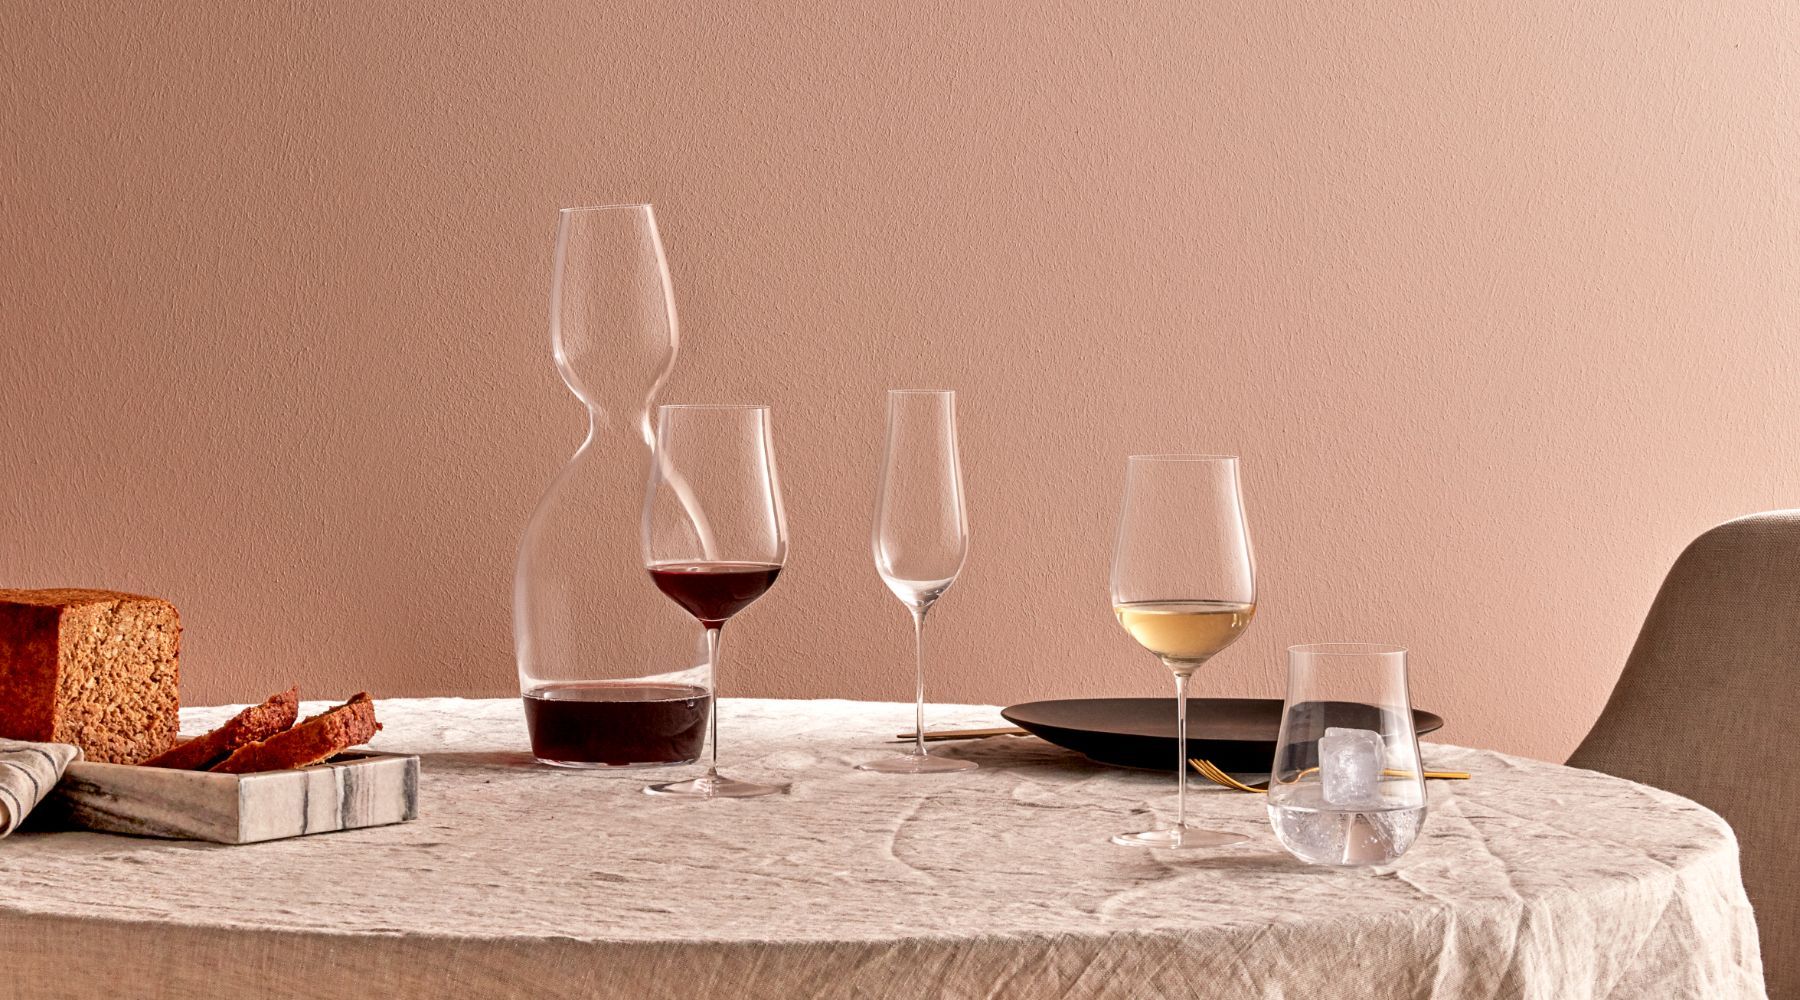 NUDE Ghost Zero Tulip glass collection, which have a tulip shape, presented on a table with the NUDE Red or White decanter